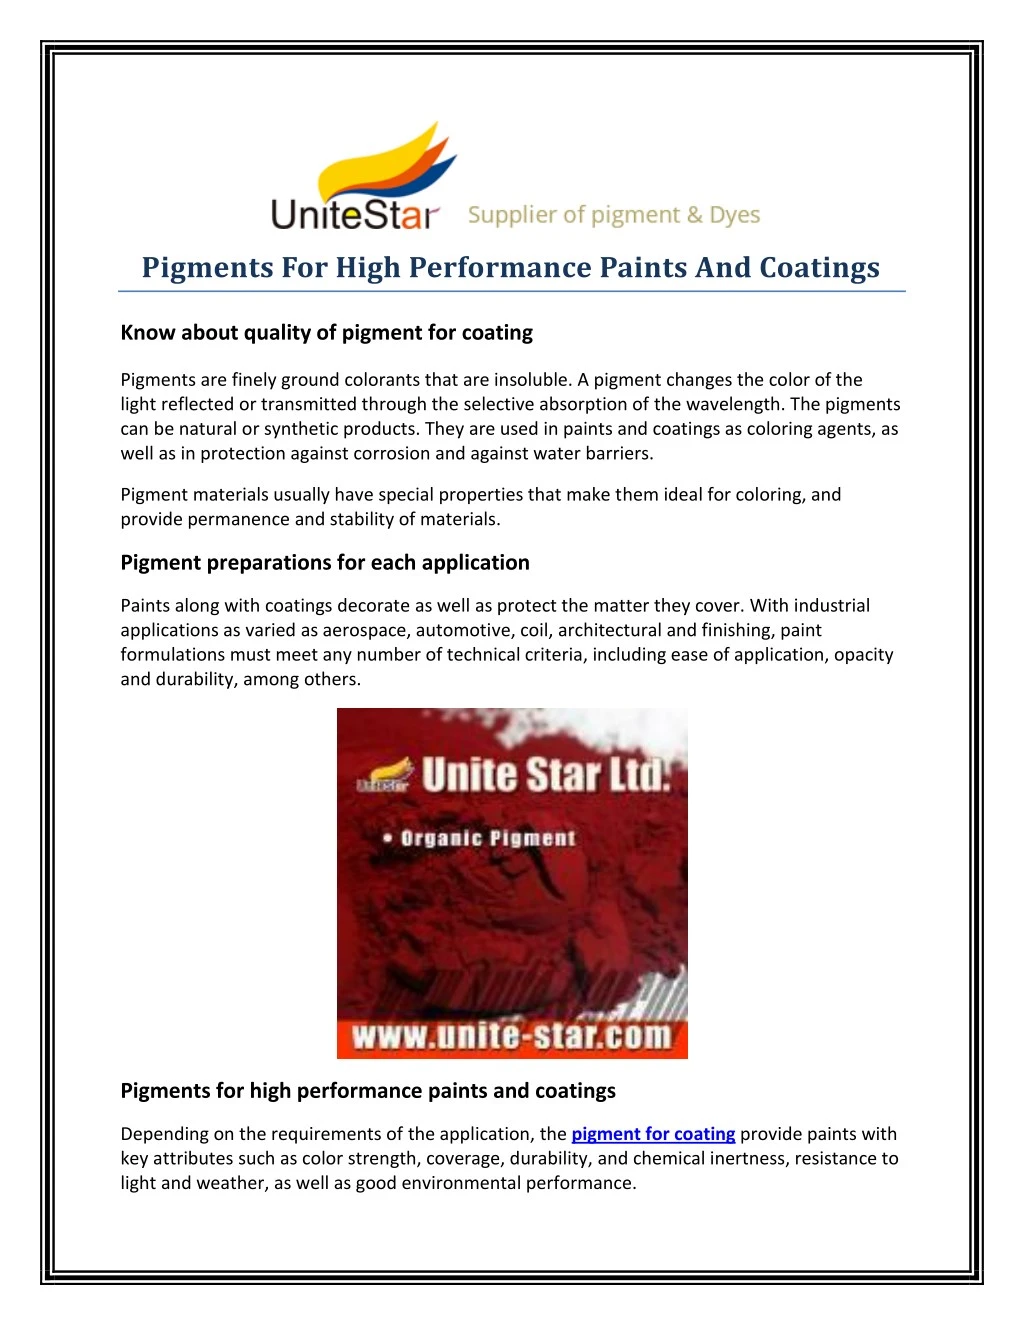 pigments for high performance paints and coatings